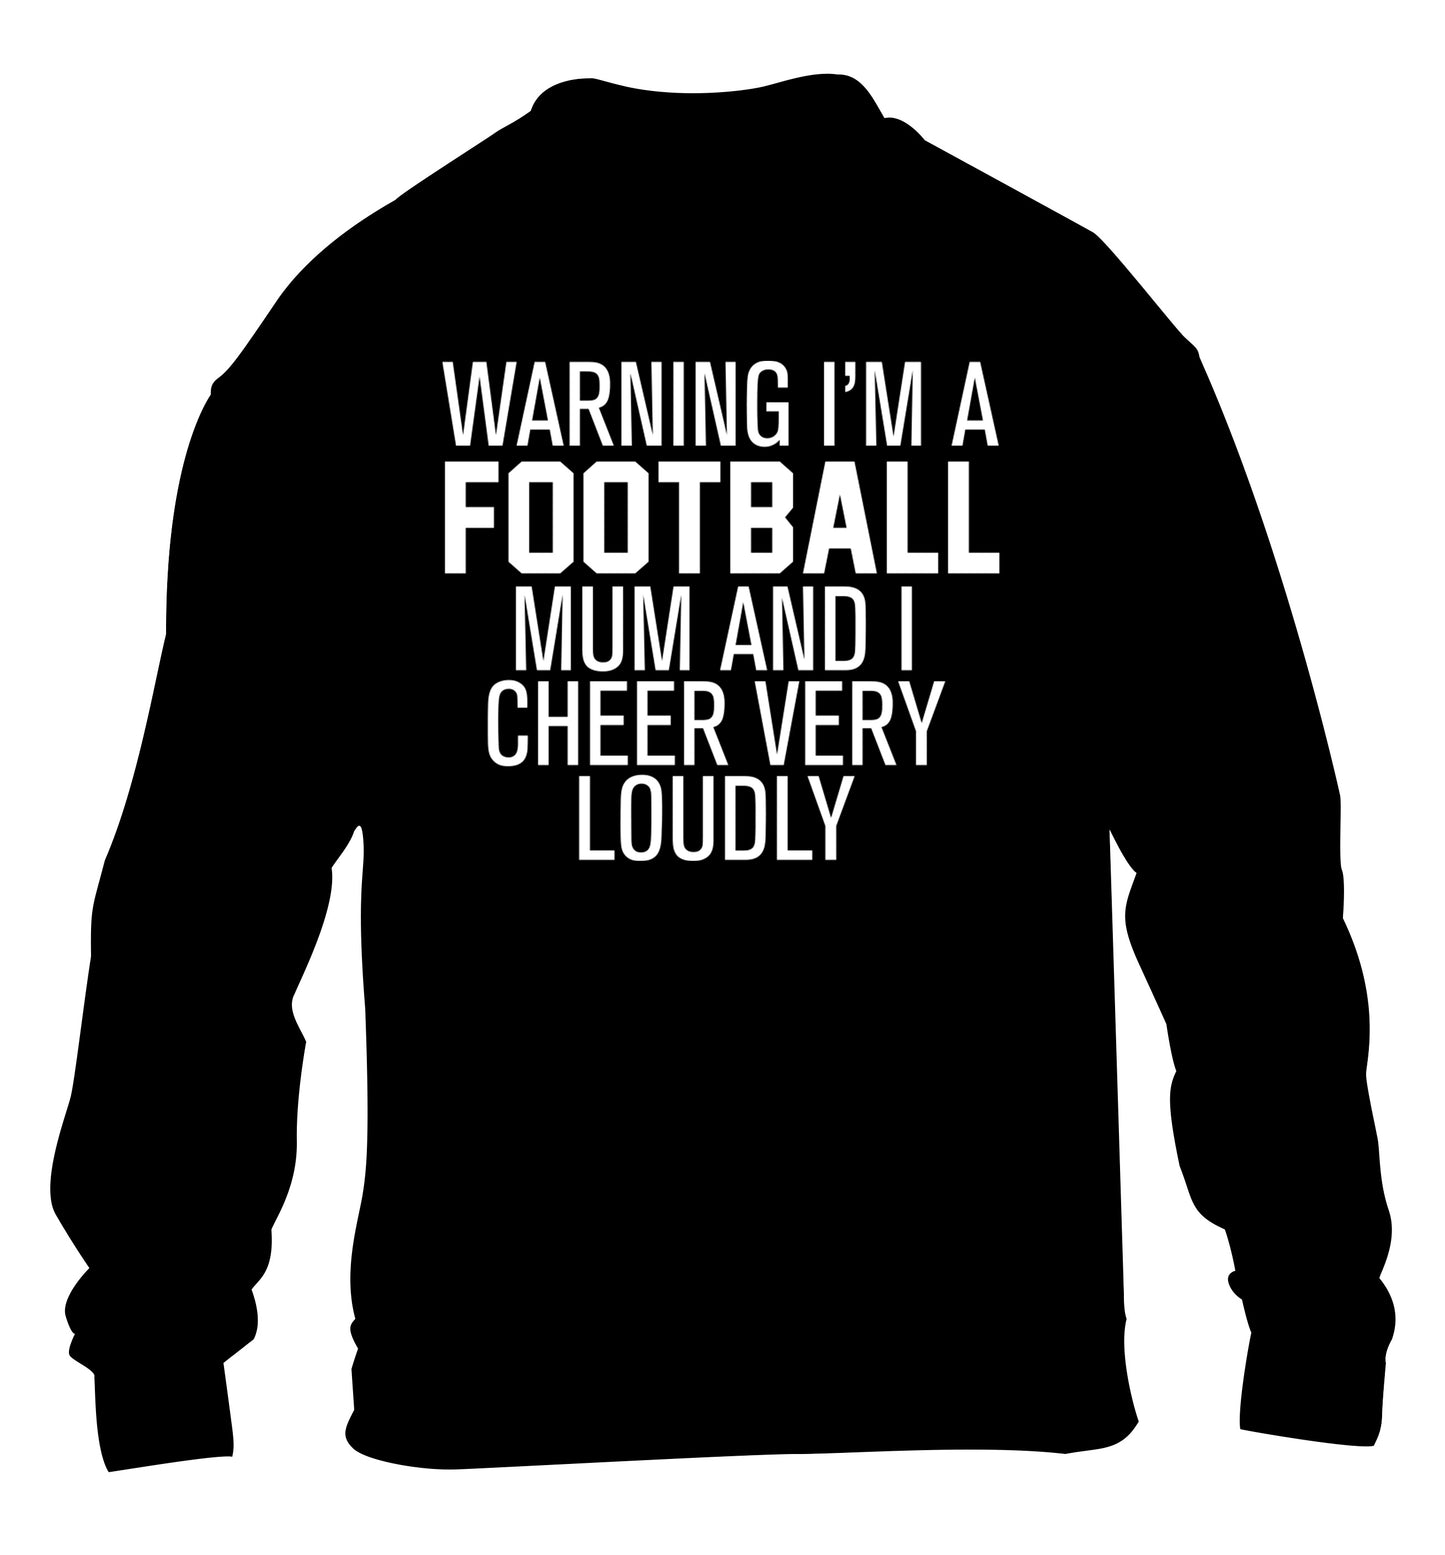 Warning I'm a football mum and I cheer very loudly children's black sweater 12-14 Years